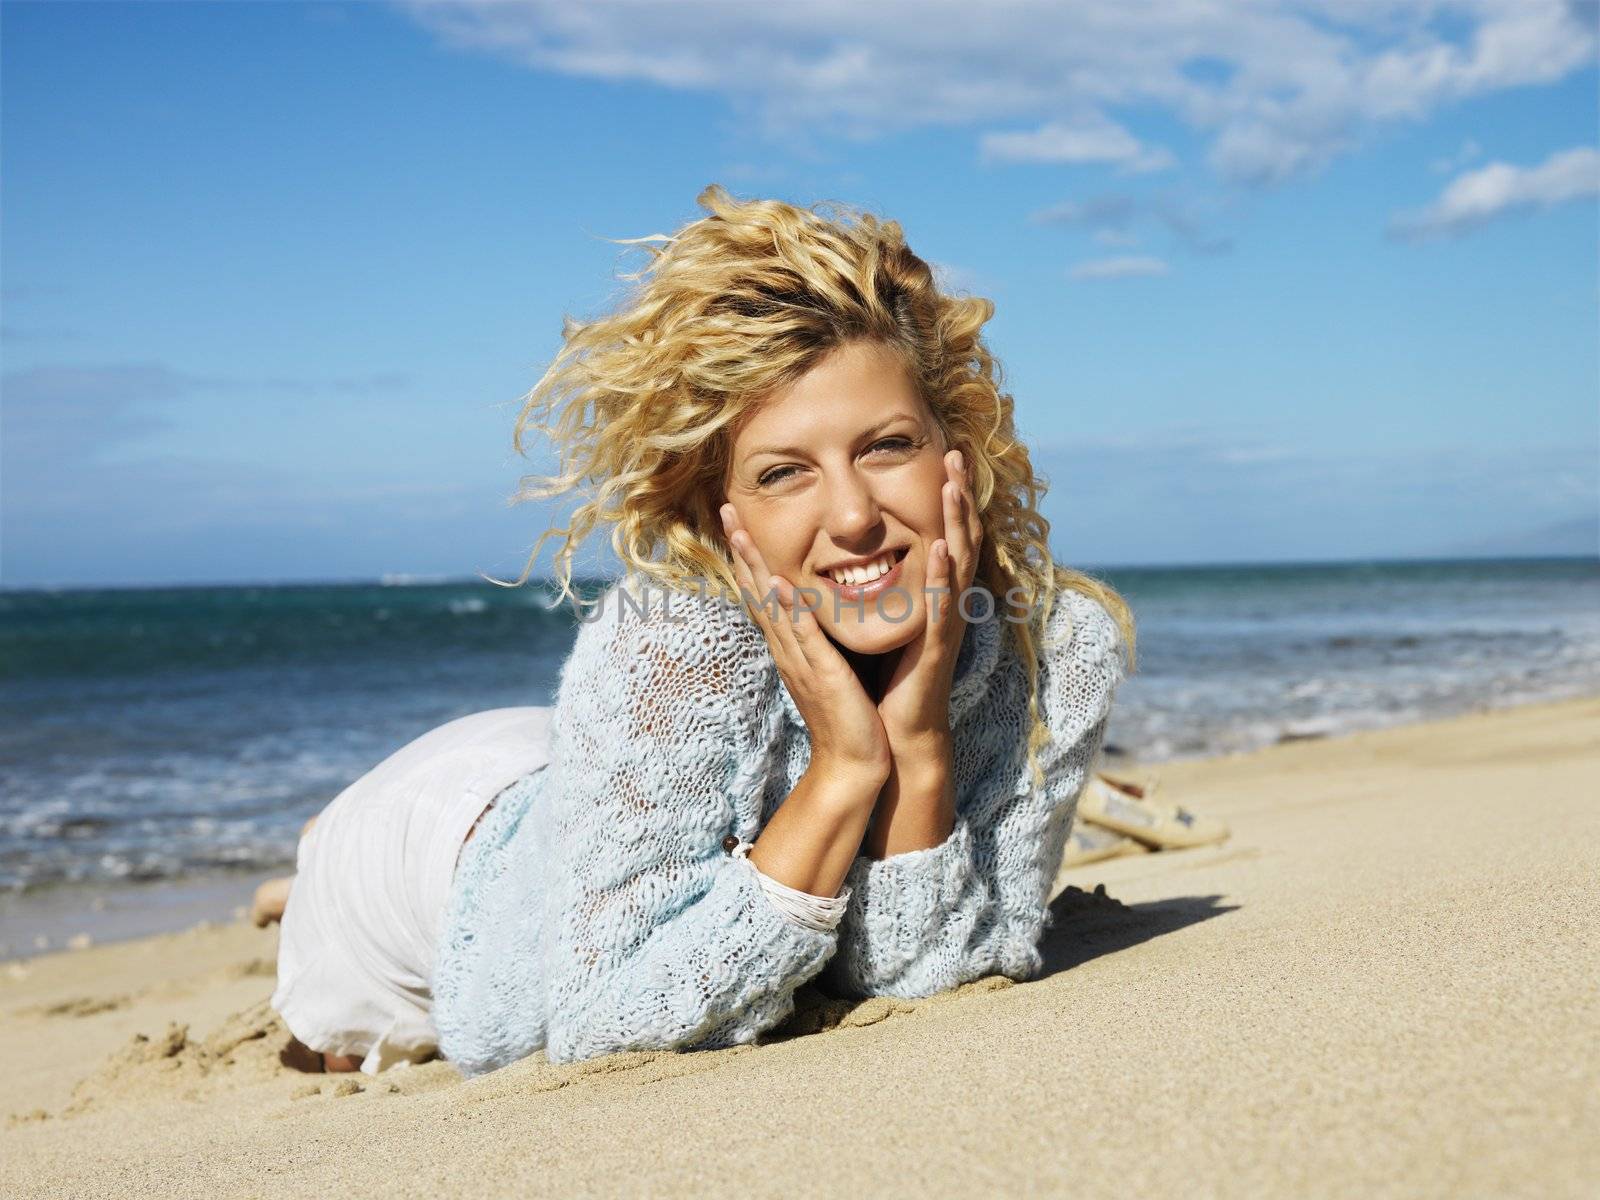 Pretty young blond woman lying in sand on Maui, Hawaii beach with head resting on hands smiling.